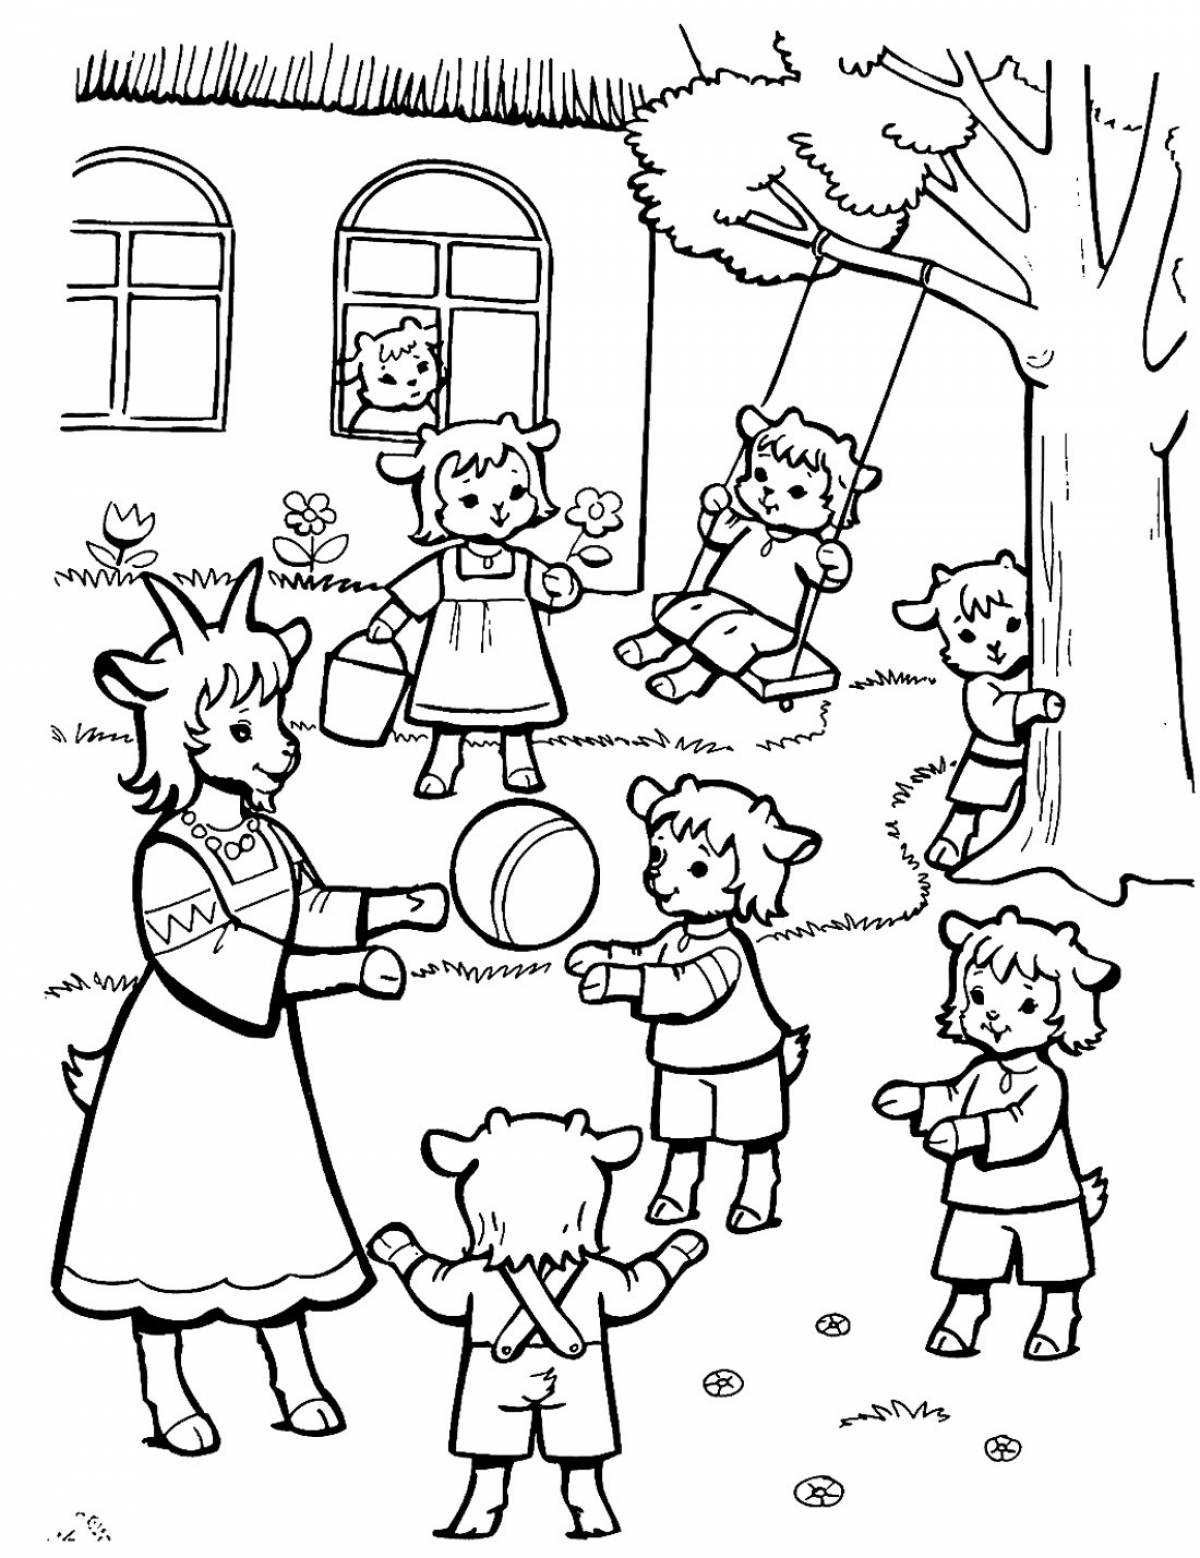 Glittering wolf and seven children coloring page